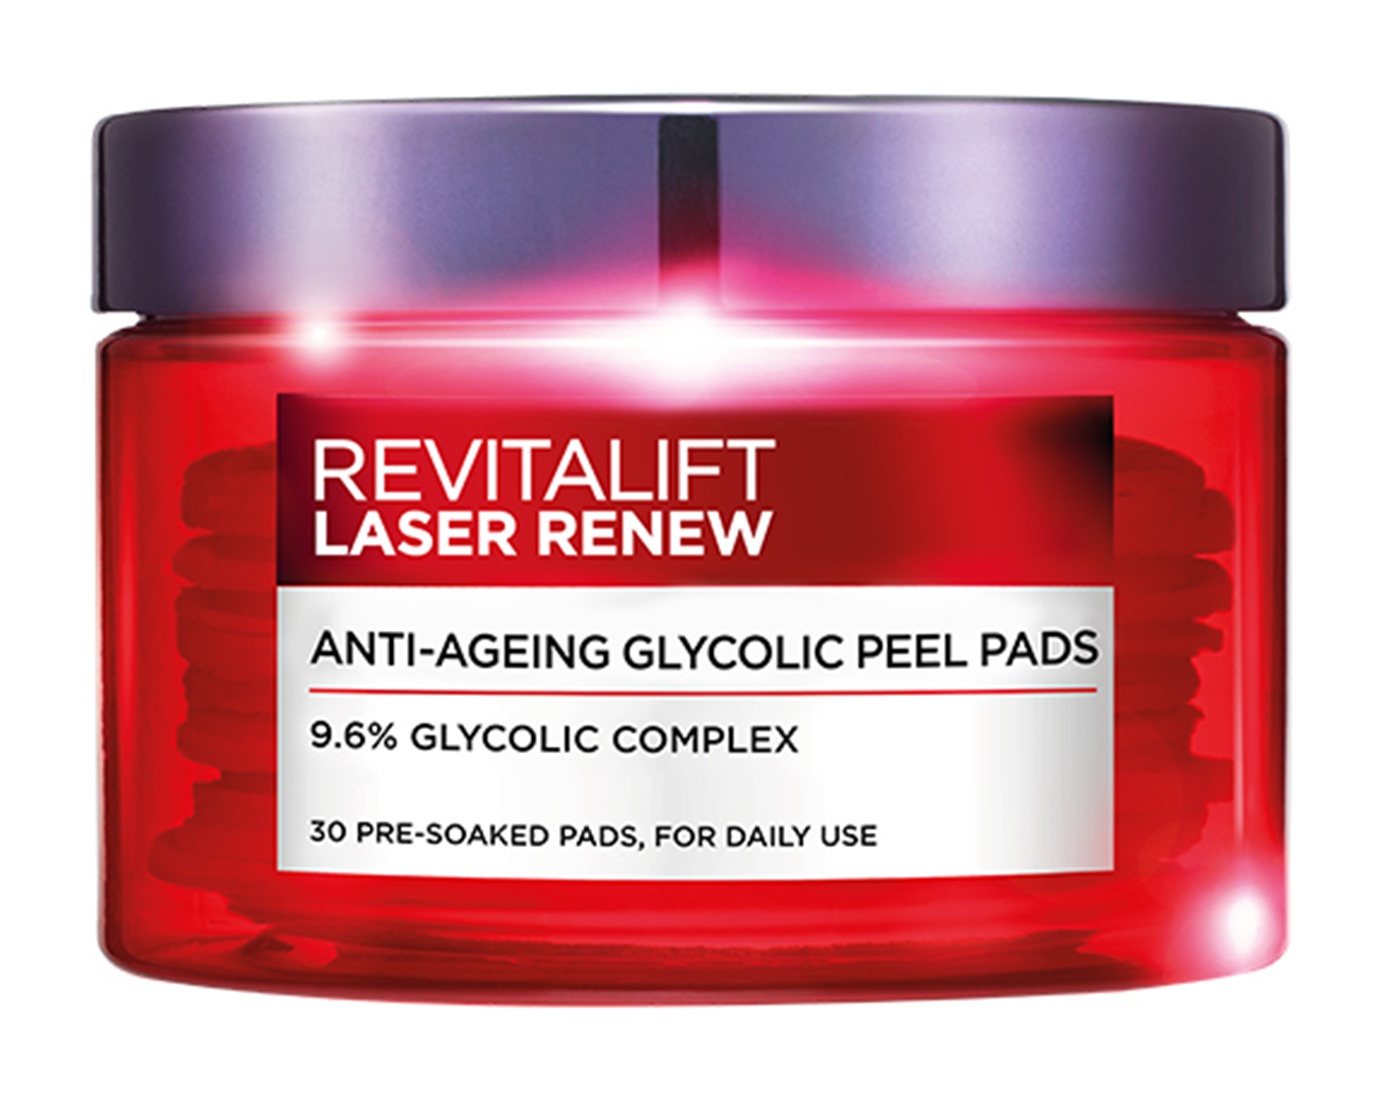 L'Oreal Revitalift Laser Renew Anti-Ageing Glycolic Peel Pads